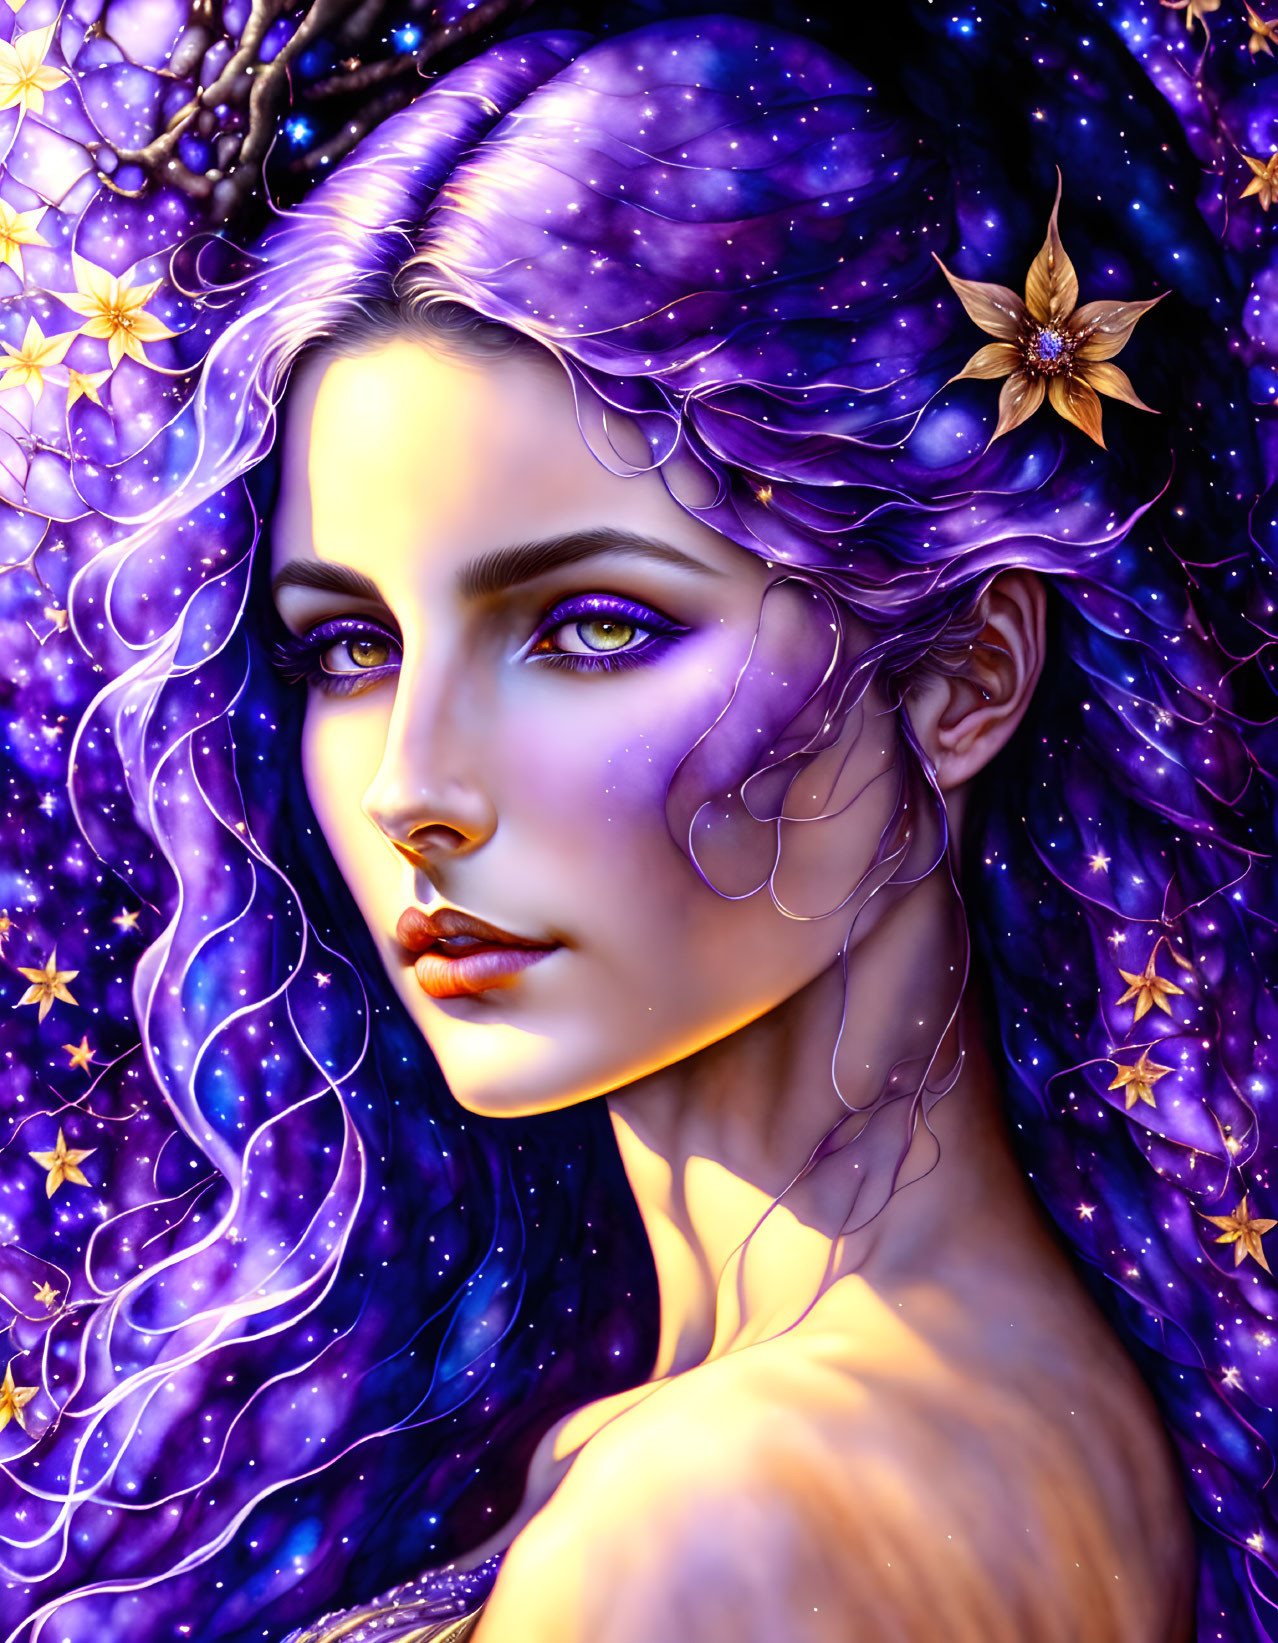 Illustrated portrait of woman with purple starry hair and golden flowers, emanating mystical aura